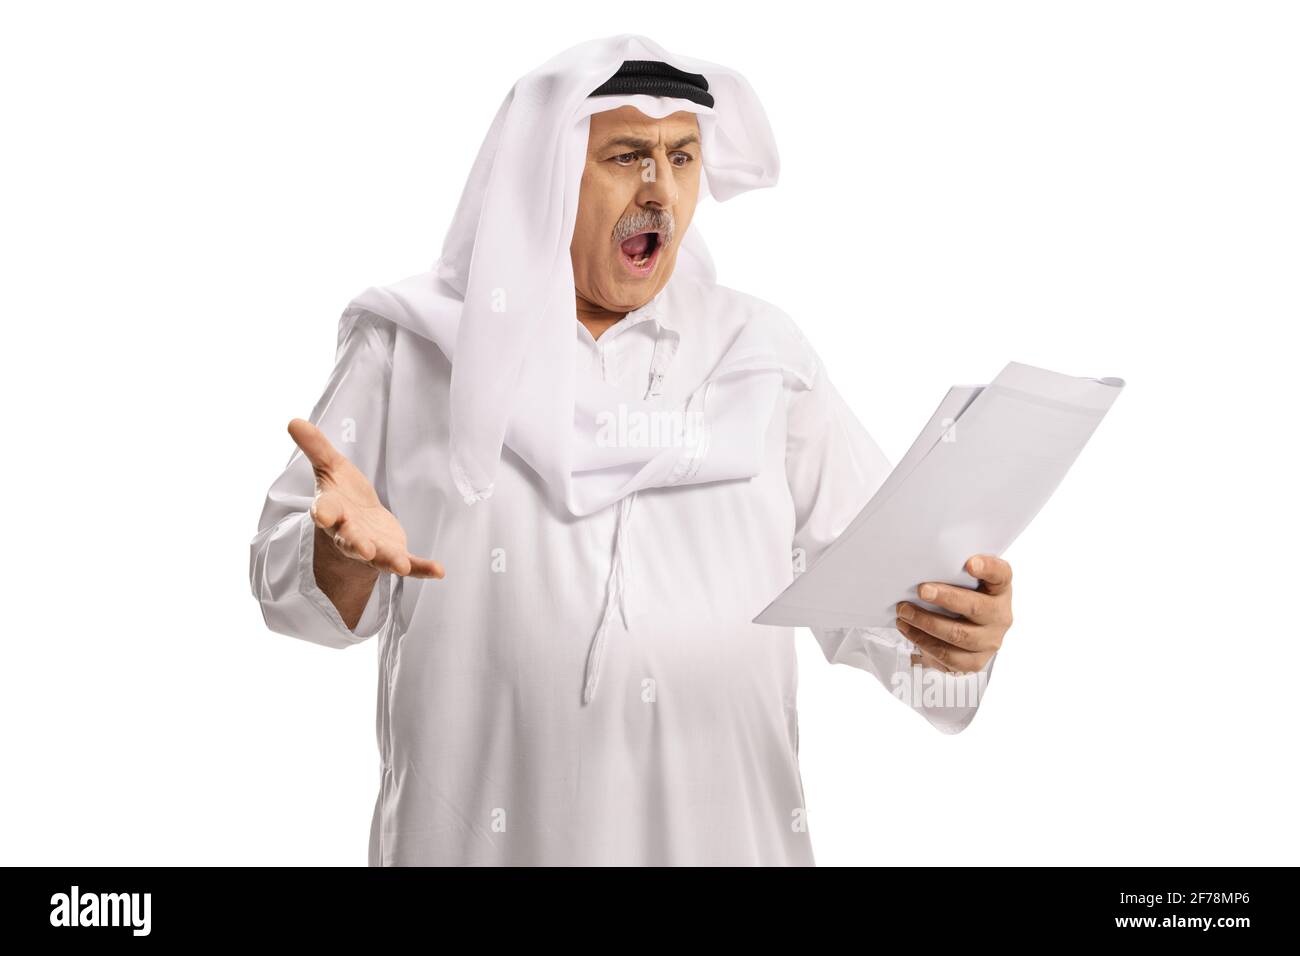 Angry mature arab man holding a paper document isolated on white background Stock Photo